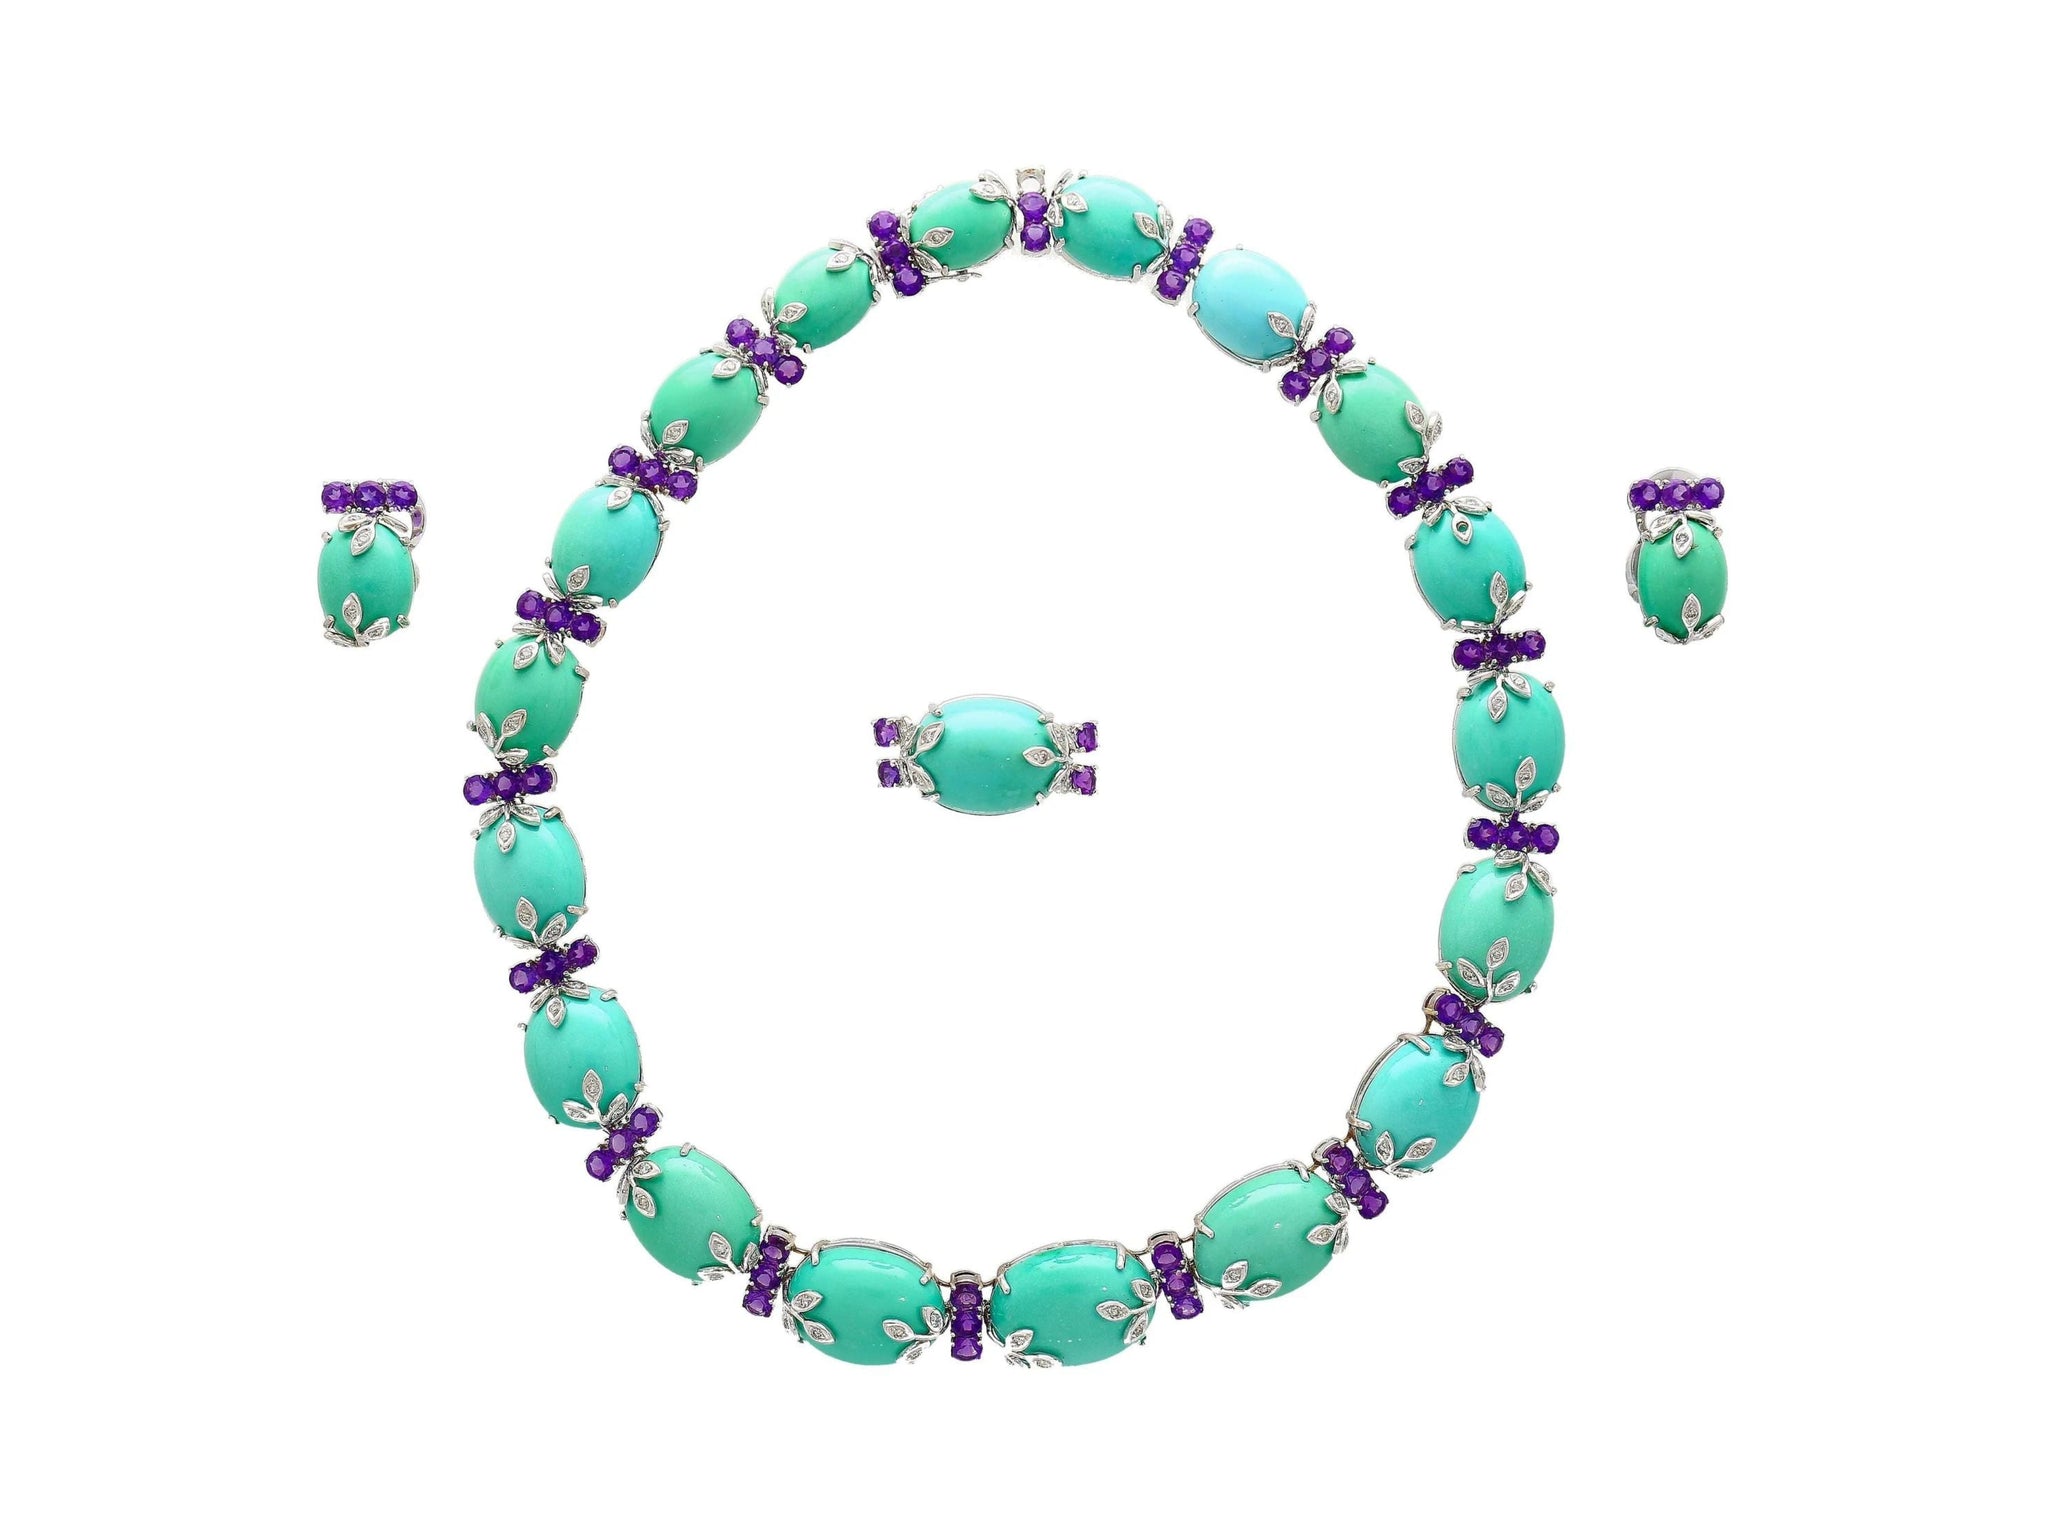 Vintage Turquoise, Amethyst and Diamond Ring, Earring, and Necklace Jewelry Set